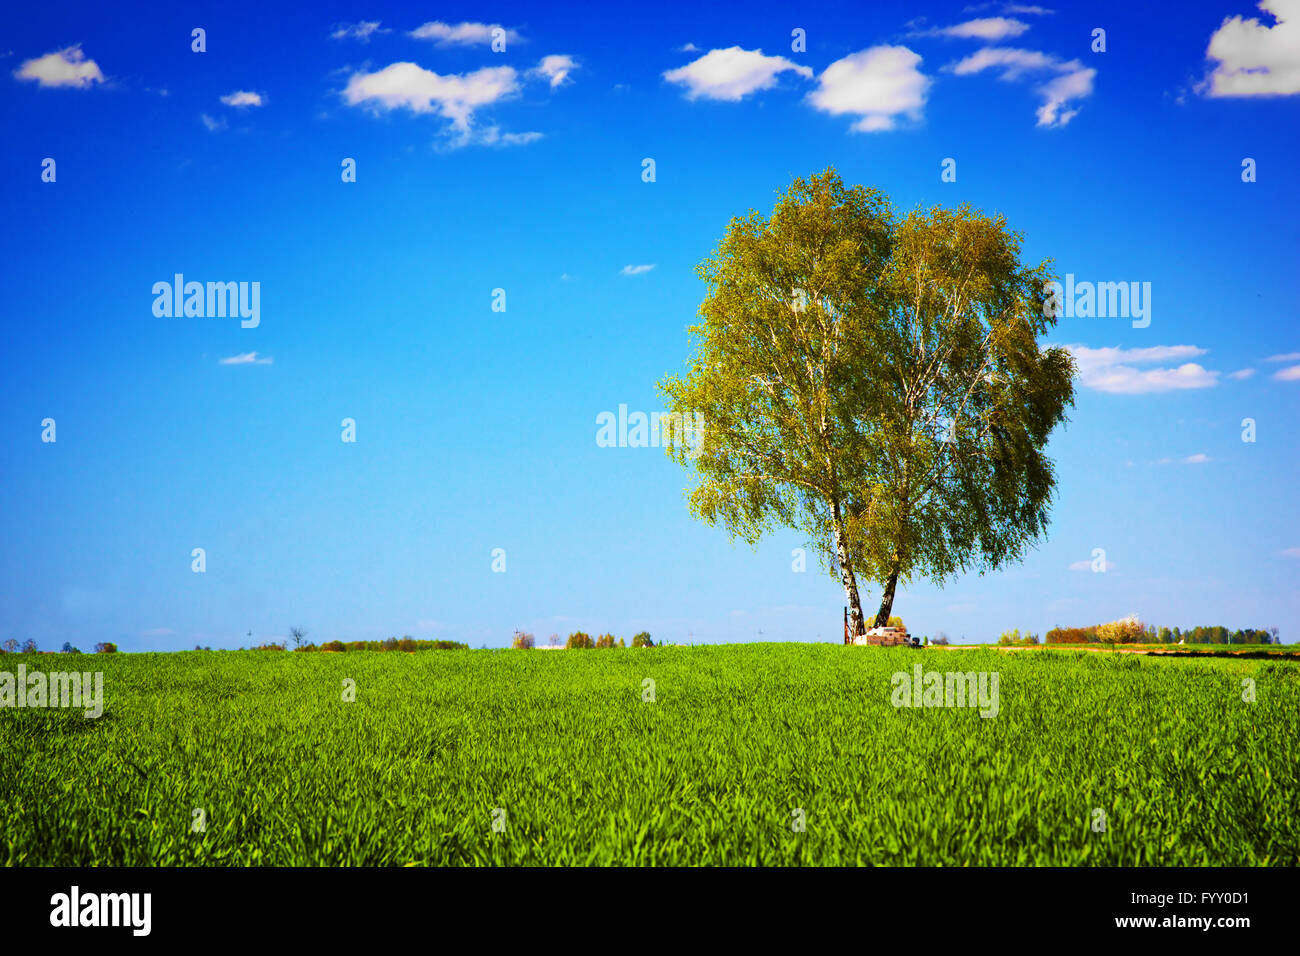 Green field landscape with a single tree. Stock Photo